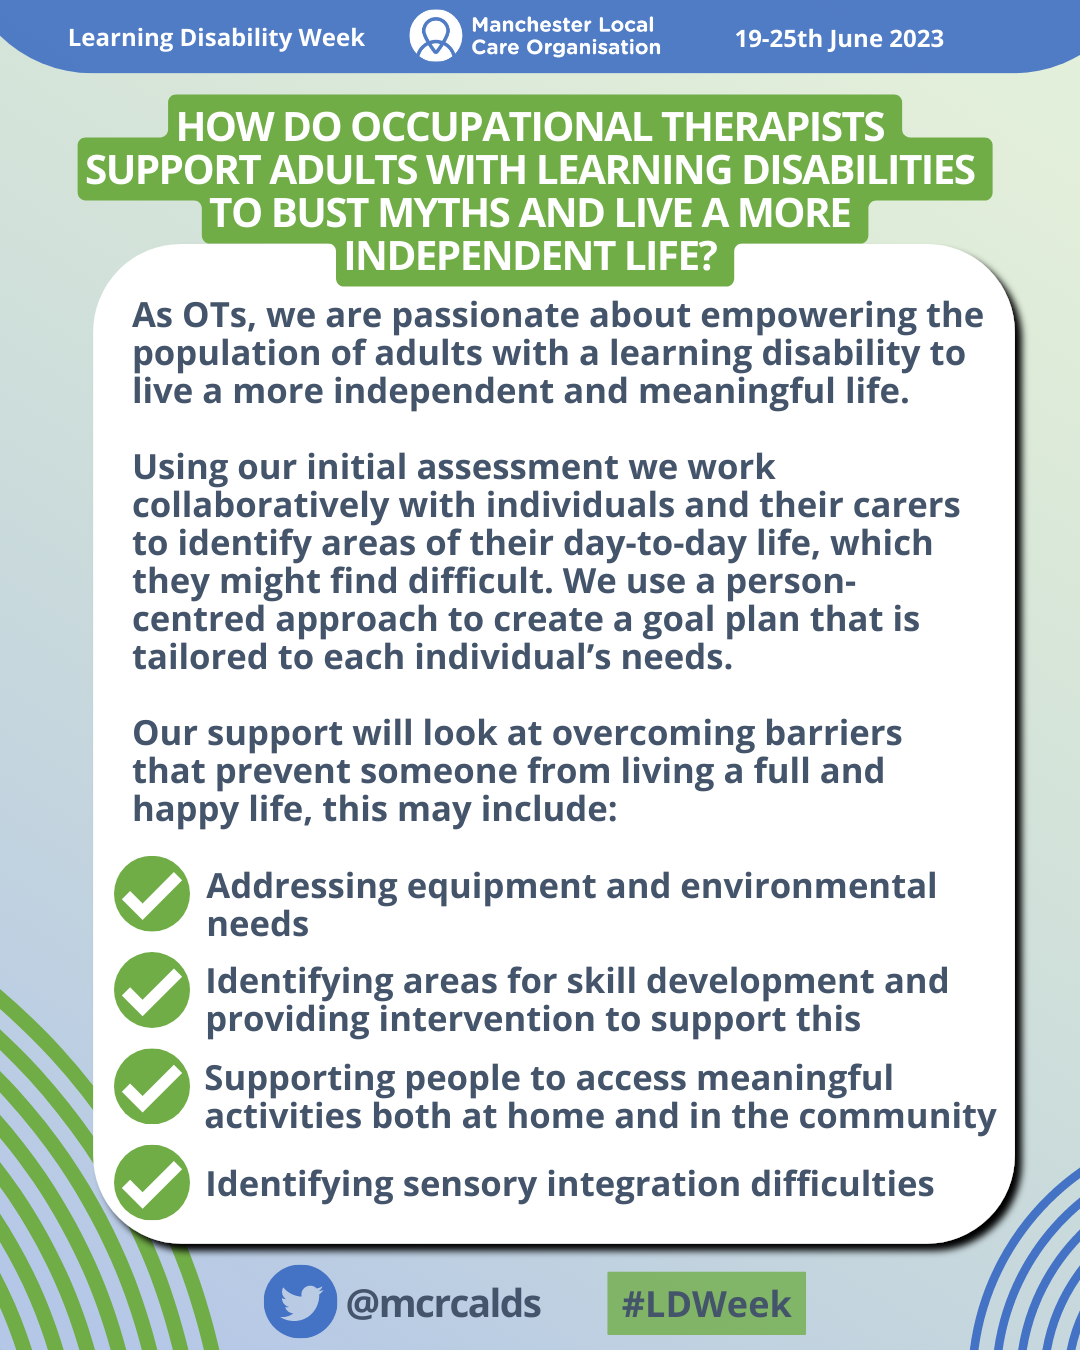 Text reads: How do Occupational Therapists support adults with learning disabilities to bust myths and live a more independent life? As OTs, we are passionate about empowering the population of adults with a learning disability to live a more independent and meaningful life. Using our initial assessment we work collaboratively with individuals and their carers to identify areas of their day-to-day life, which they might find difficult. We use a person-centred approach to create a goal plan that is tailored to each individual’s needs. - Addressing equipment and environmental needs - Identifying areas for skill development and providing intervention to support this - Supporting people to access meaningful activities both at home and in the community - Identifying sensory integration difficulties